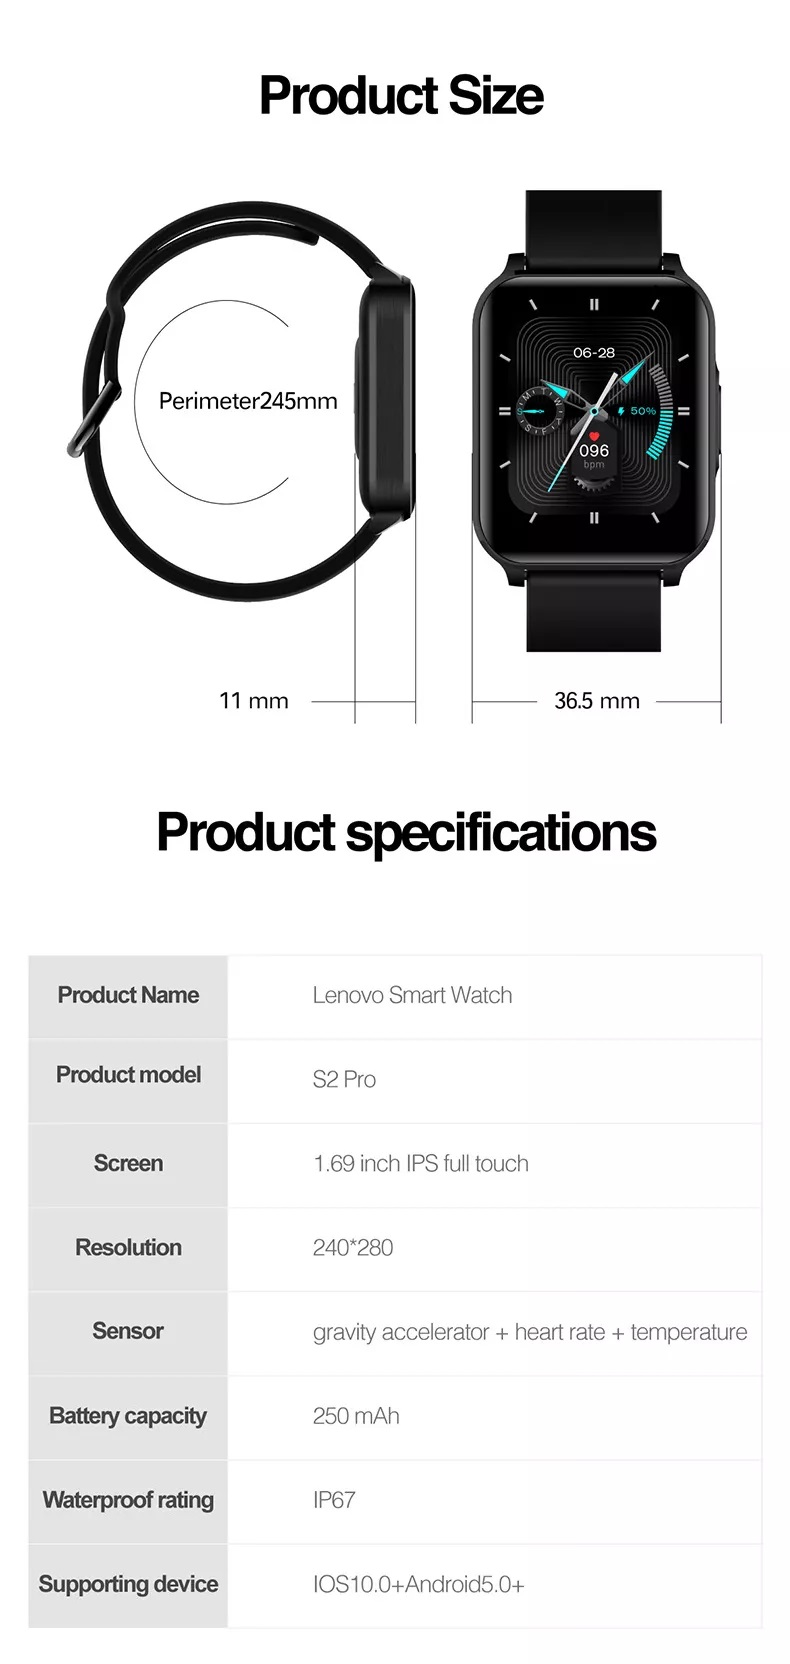 Lenovo S2 Pro Smart Watch - 1.69inch IPS screen - IP67 Waterproof - supports ISO10.0 + Android5.0 above - Pccircle - Amman Jordan